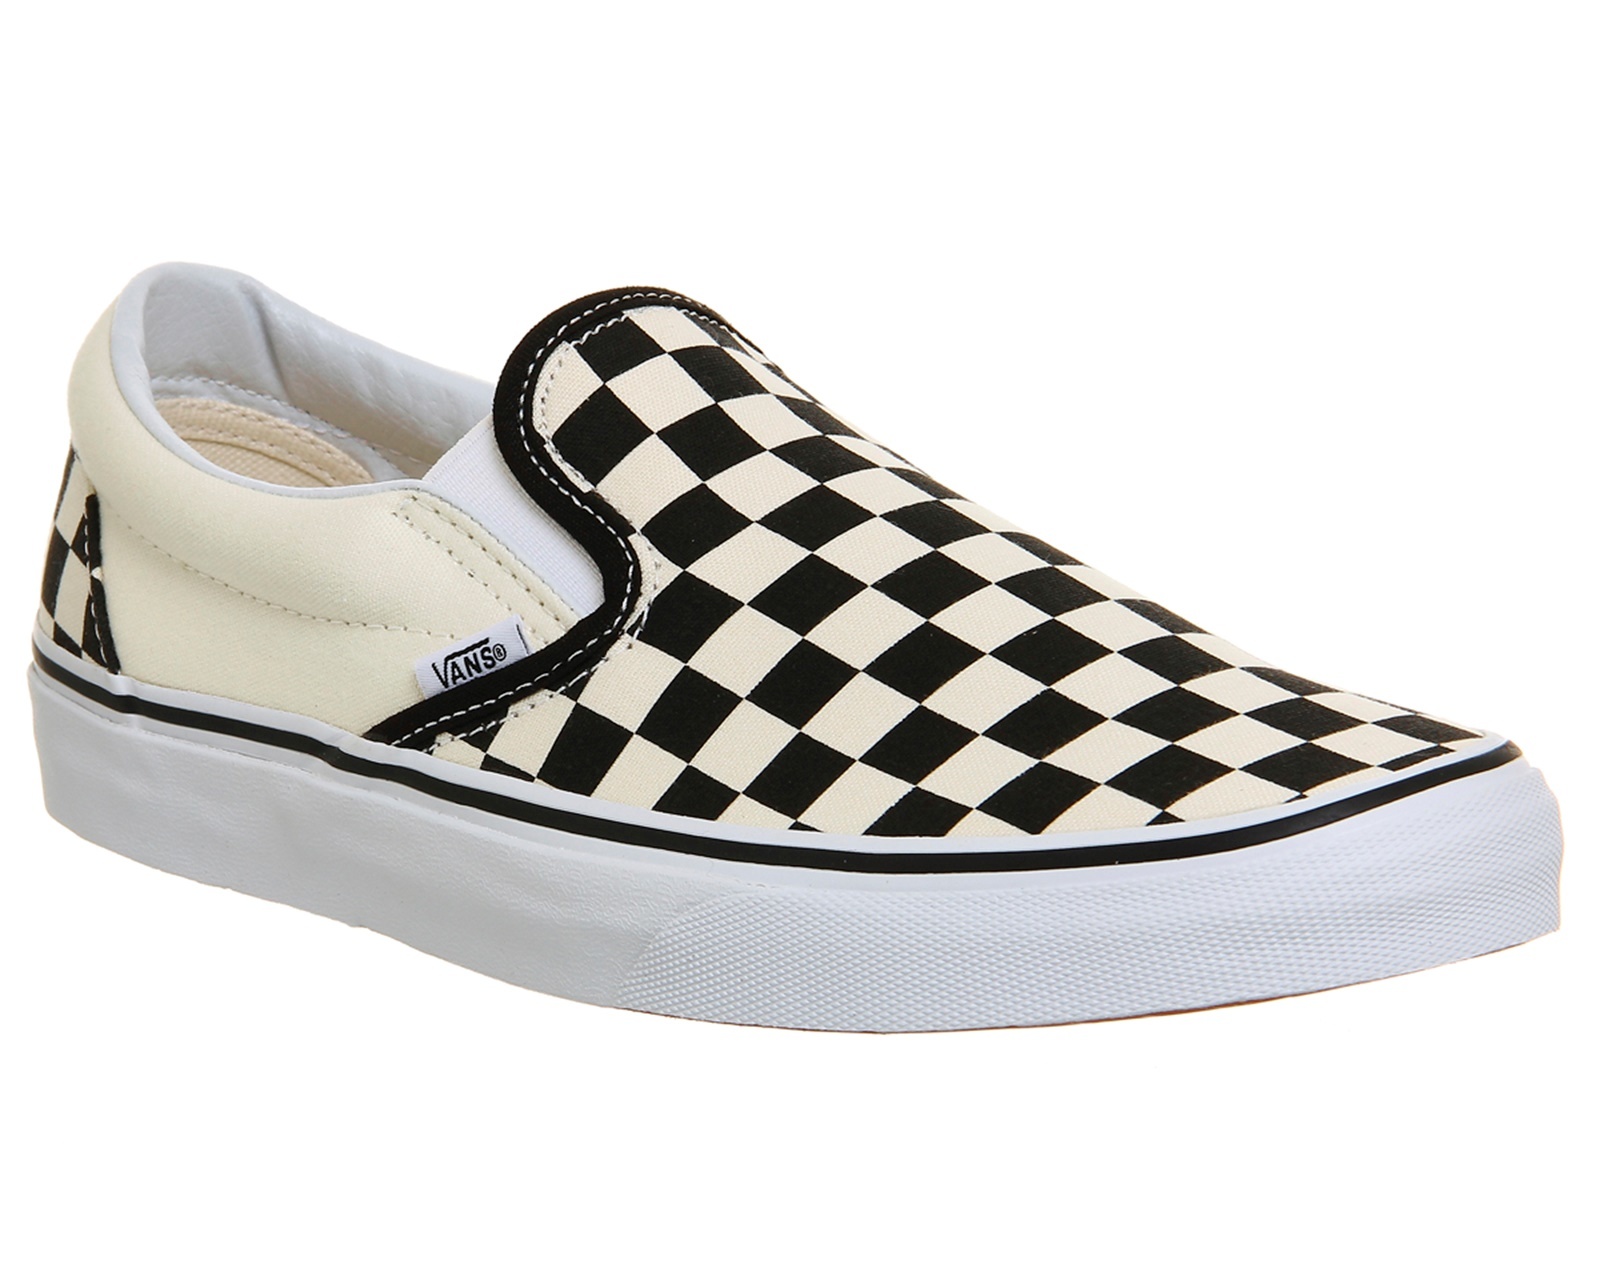 classic vans black and white